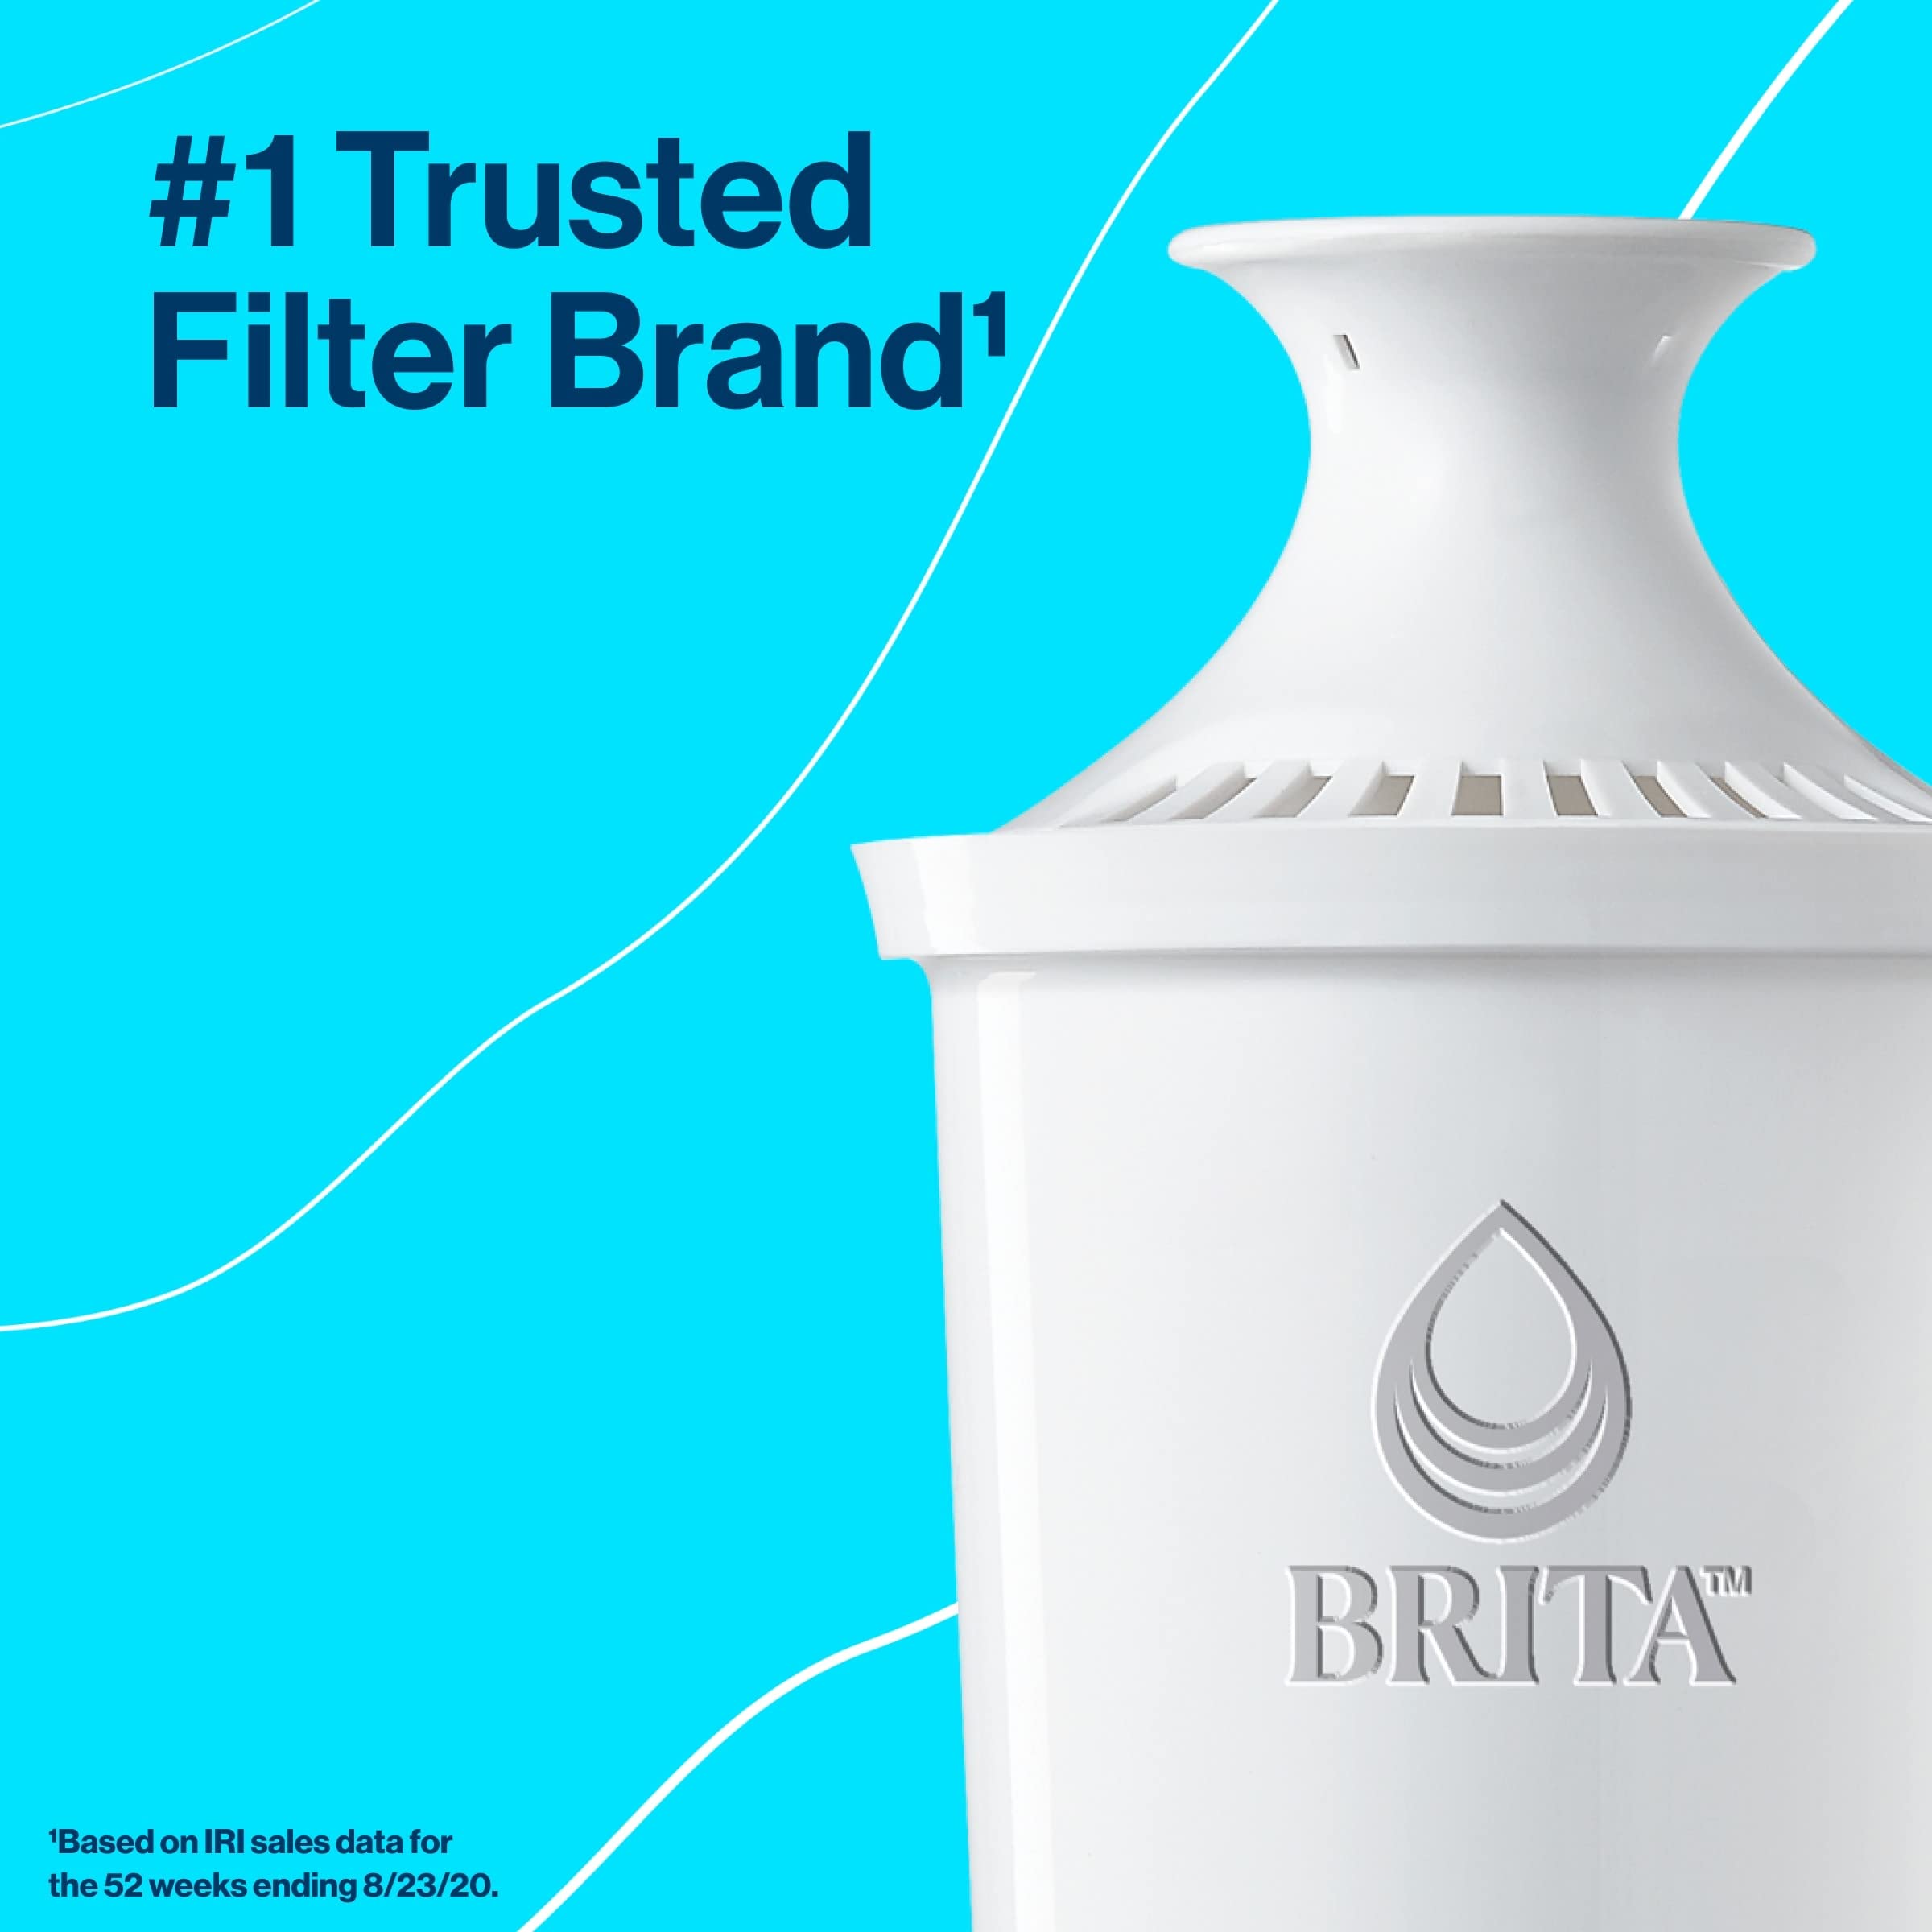 Brita Standard Water Filter Replacements for Pitchers and Dispensers, Lasts 2 Months, Reduces Chlorine Taste and Odor, 3 Count